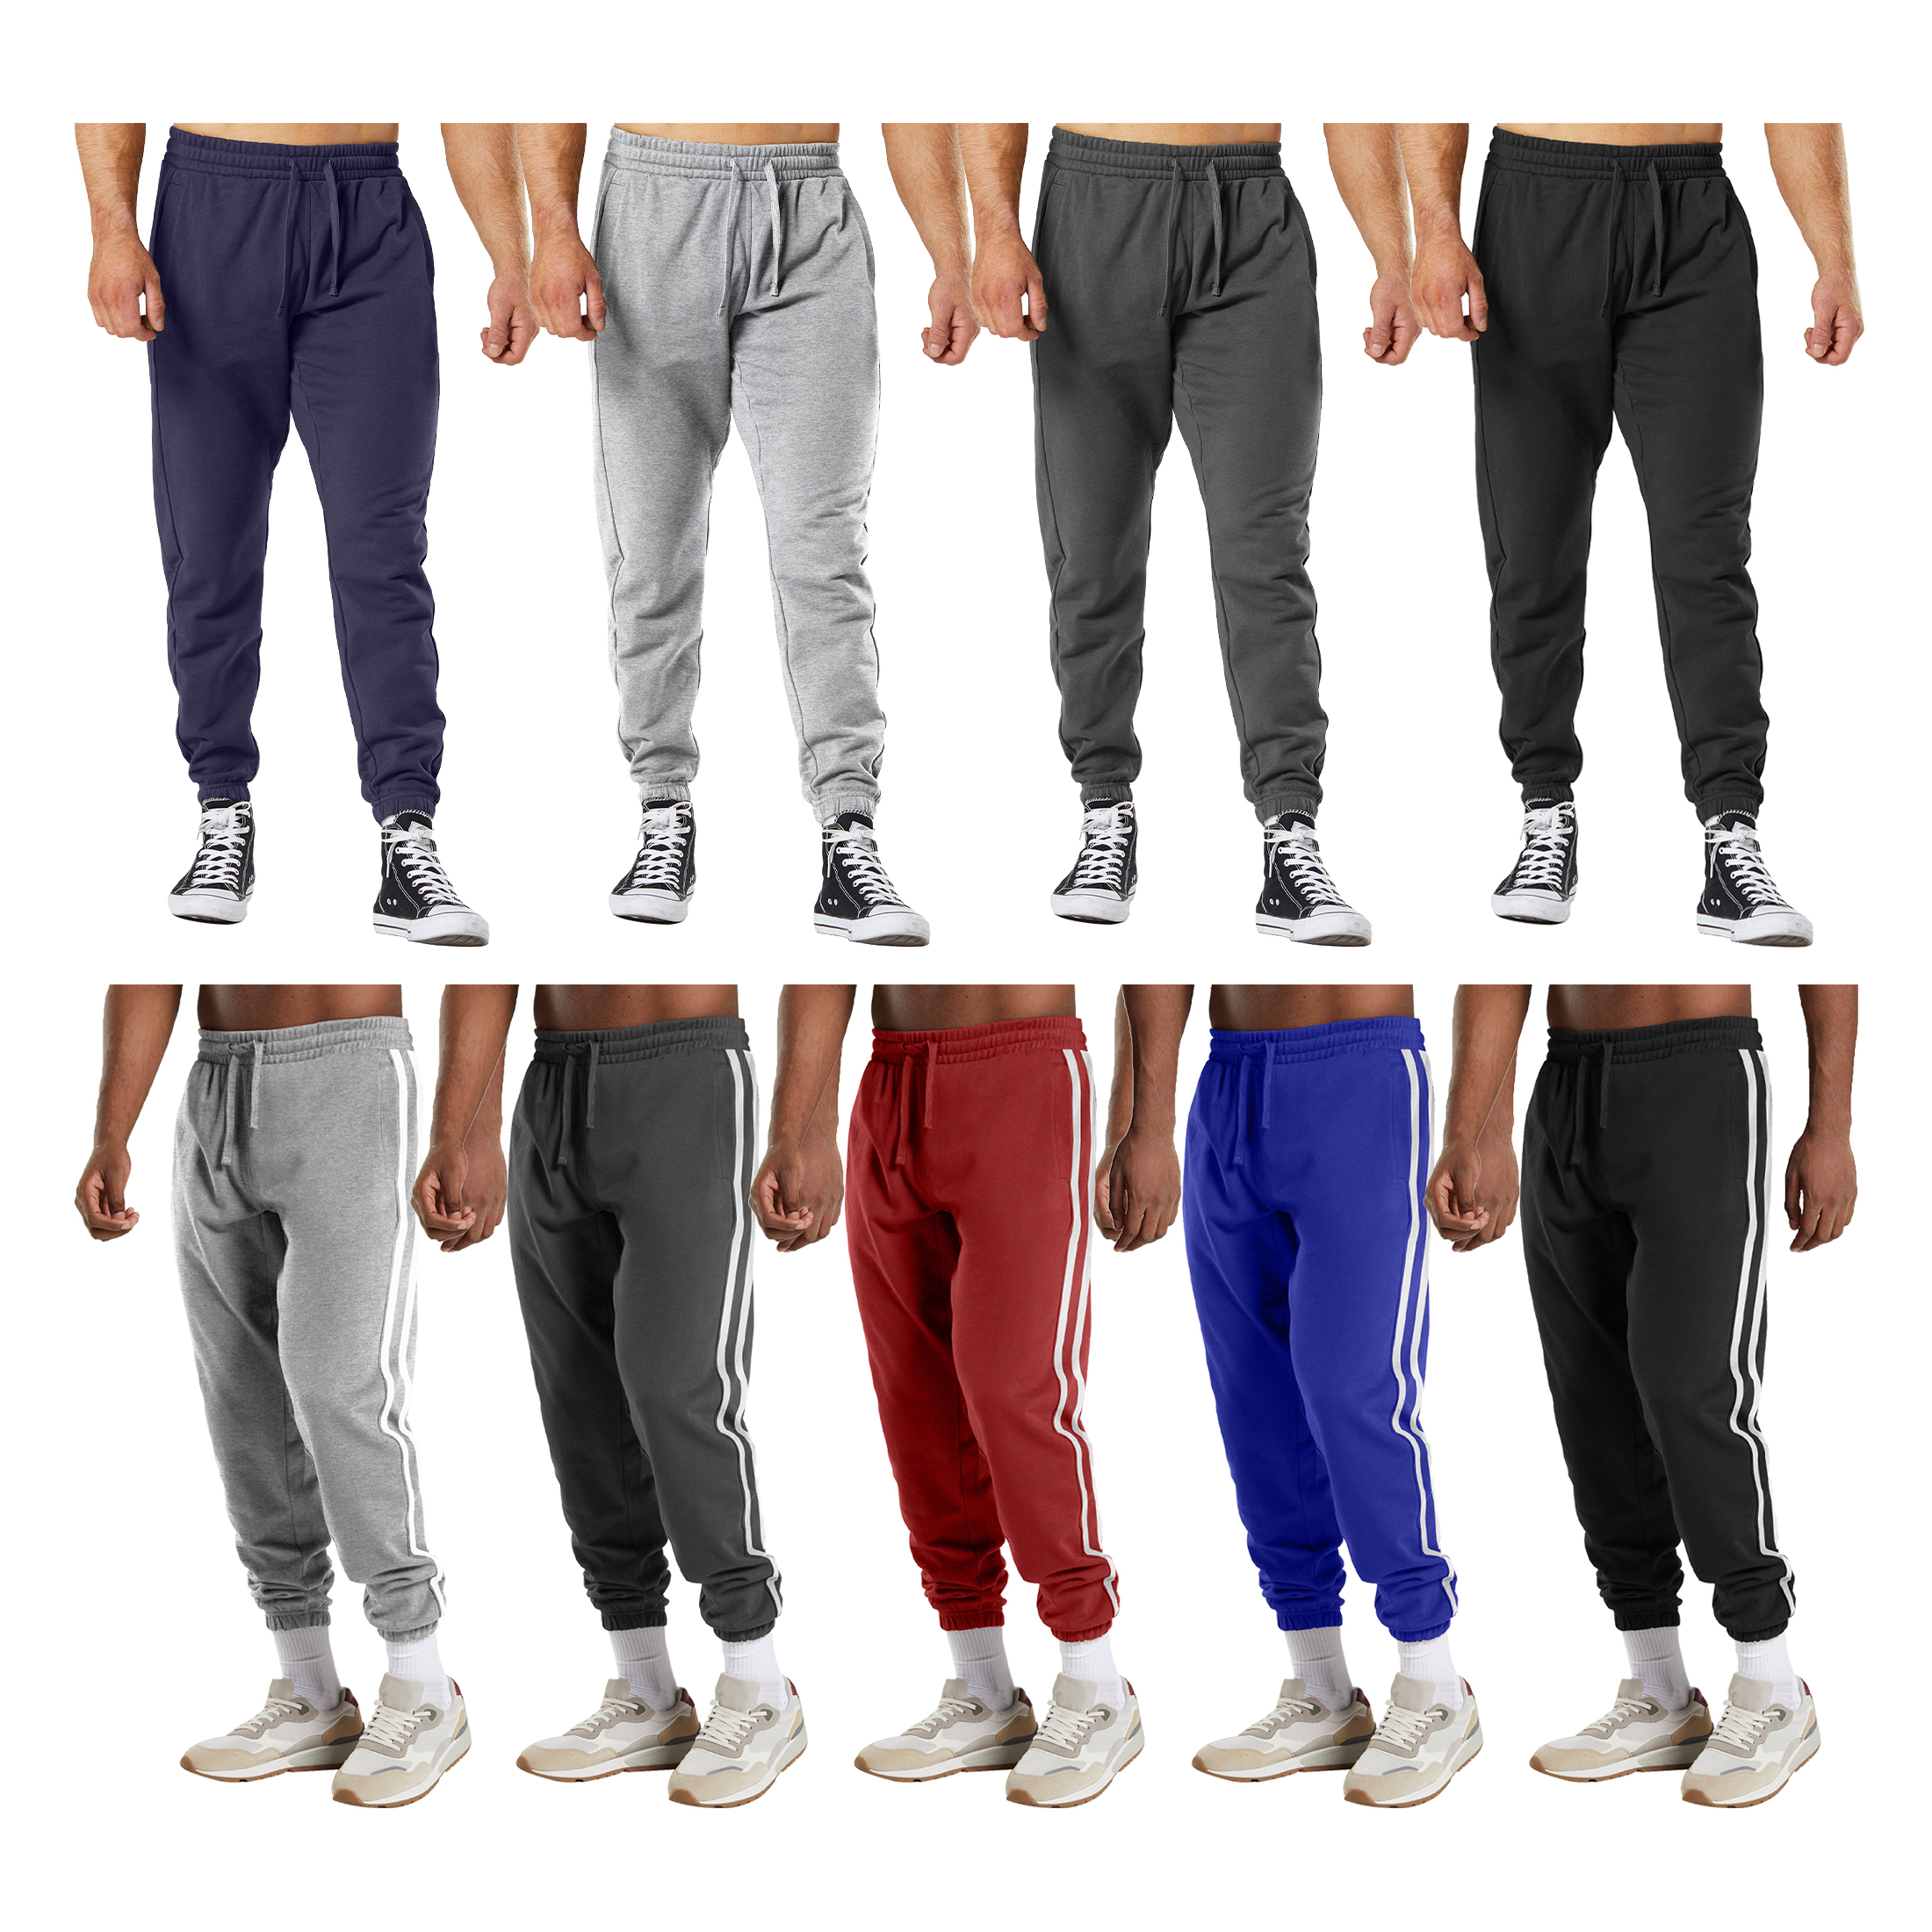 Multi-Pack: Men's Casual Fleece-Lined Elastic Bottom Jogger Pants With Pockets - 1-PACK, XL